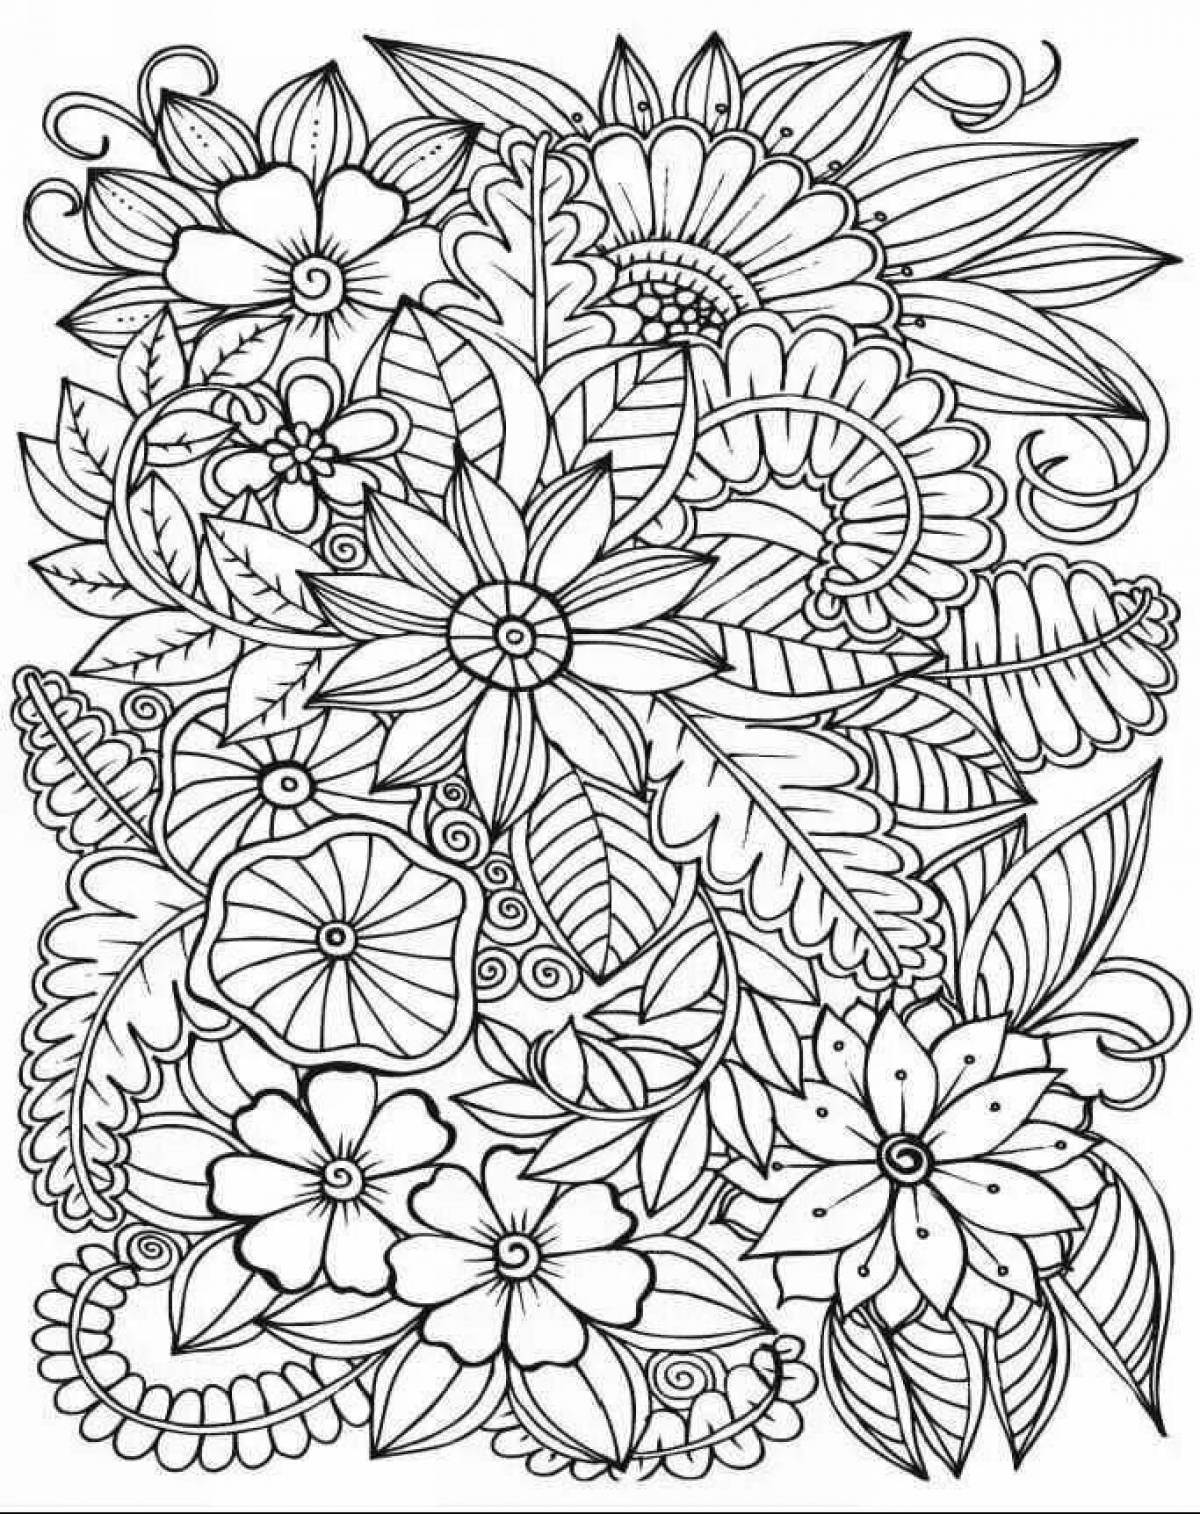 Calm coloring flower antistress